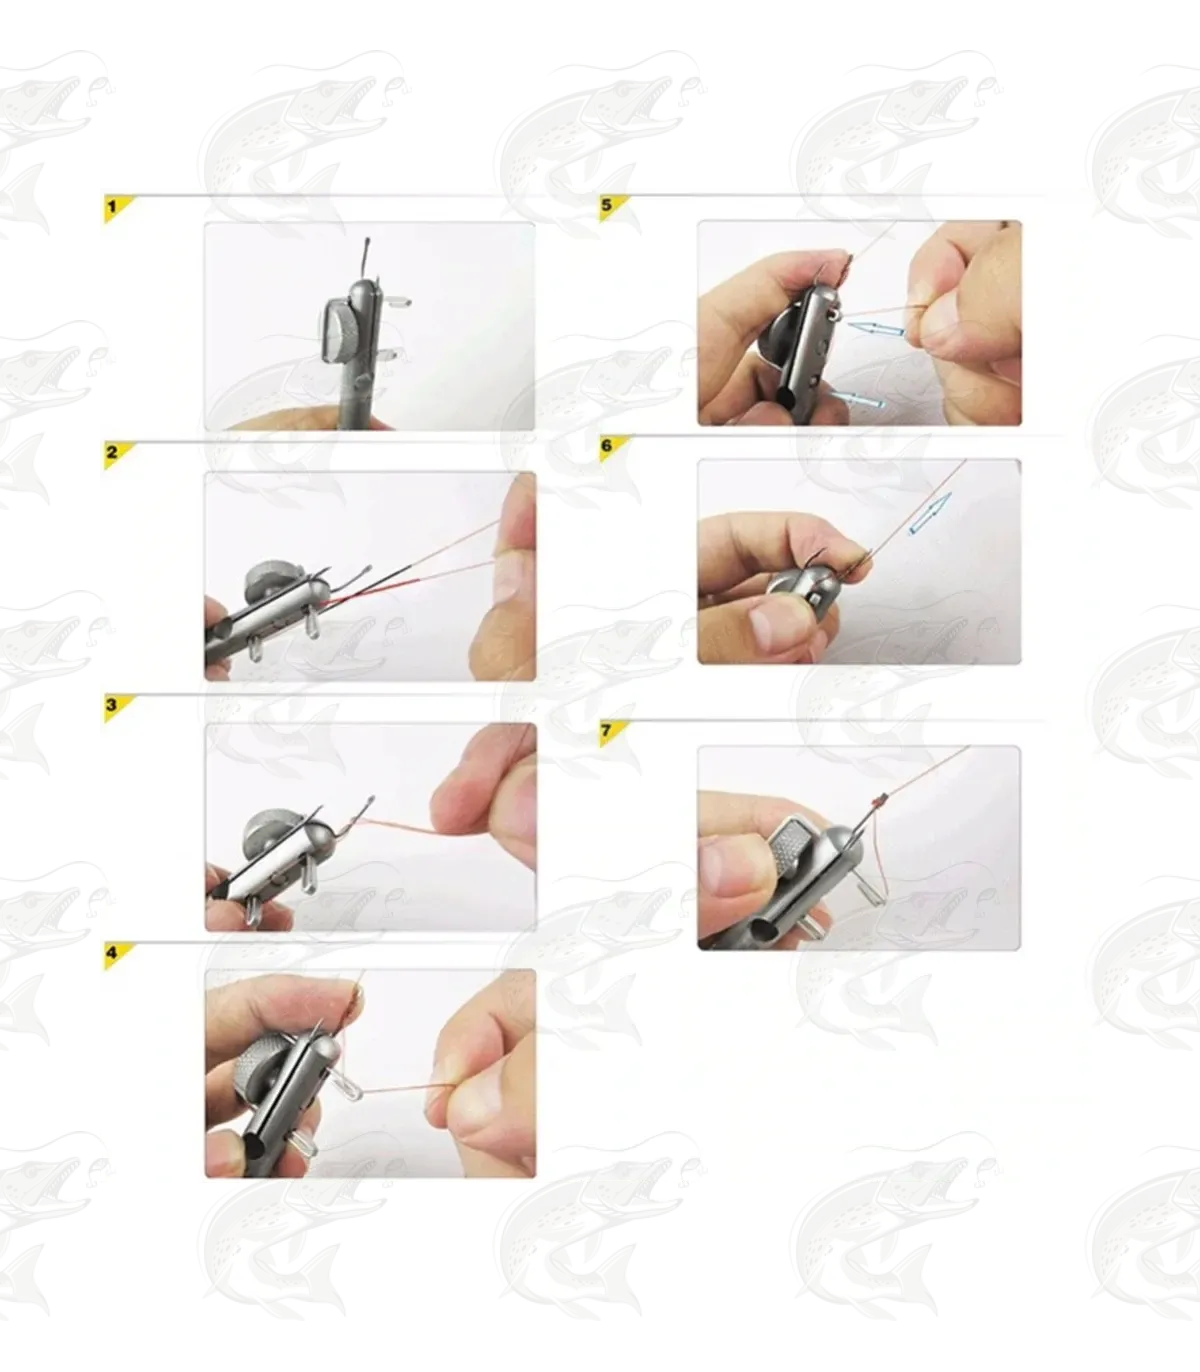 Automatic fishing knot tying tool fishng gear and tools #fishtok